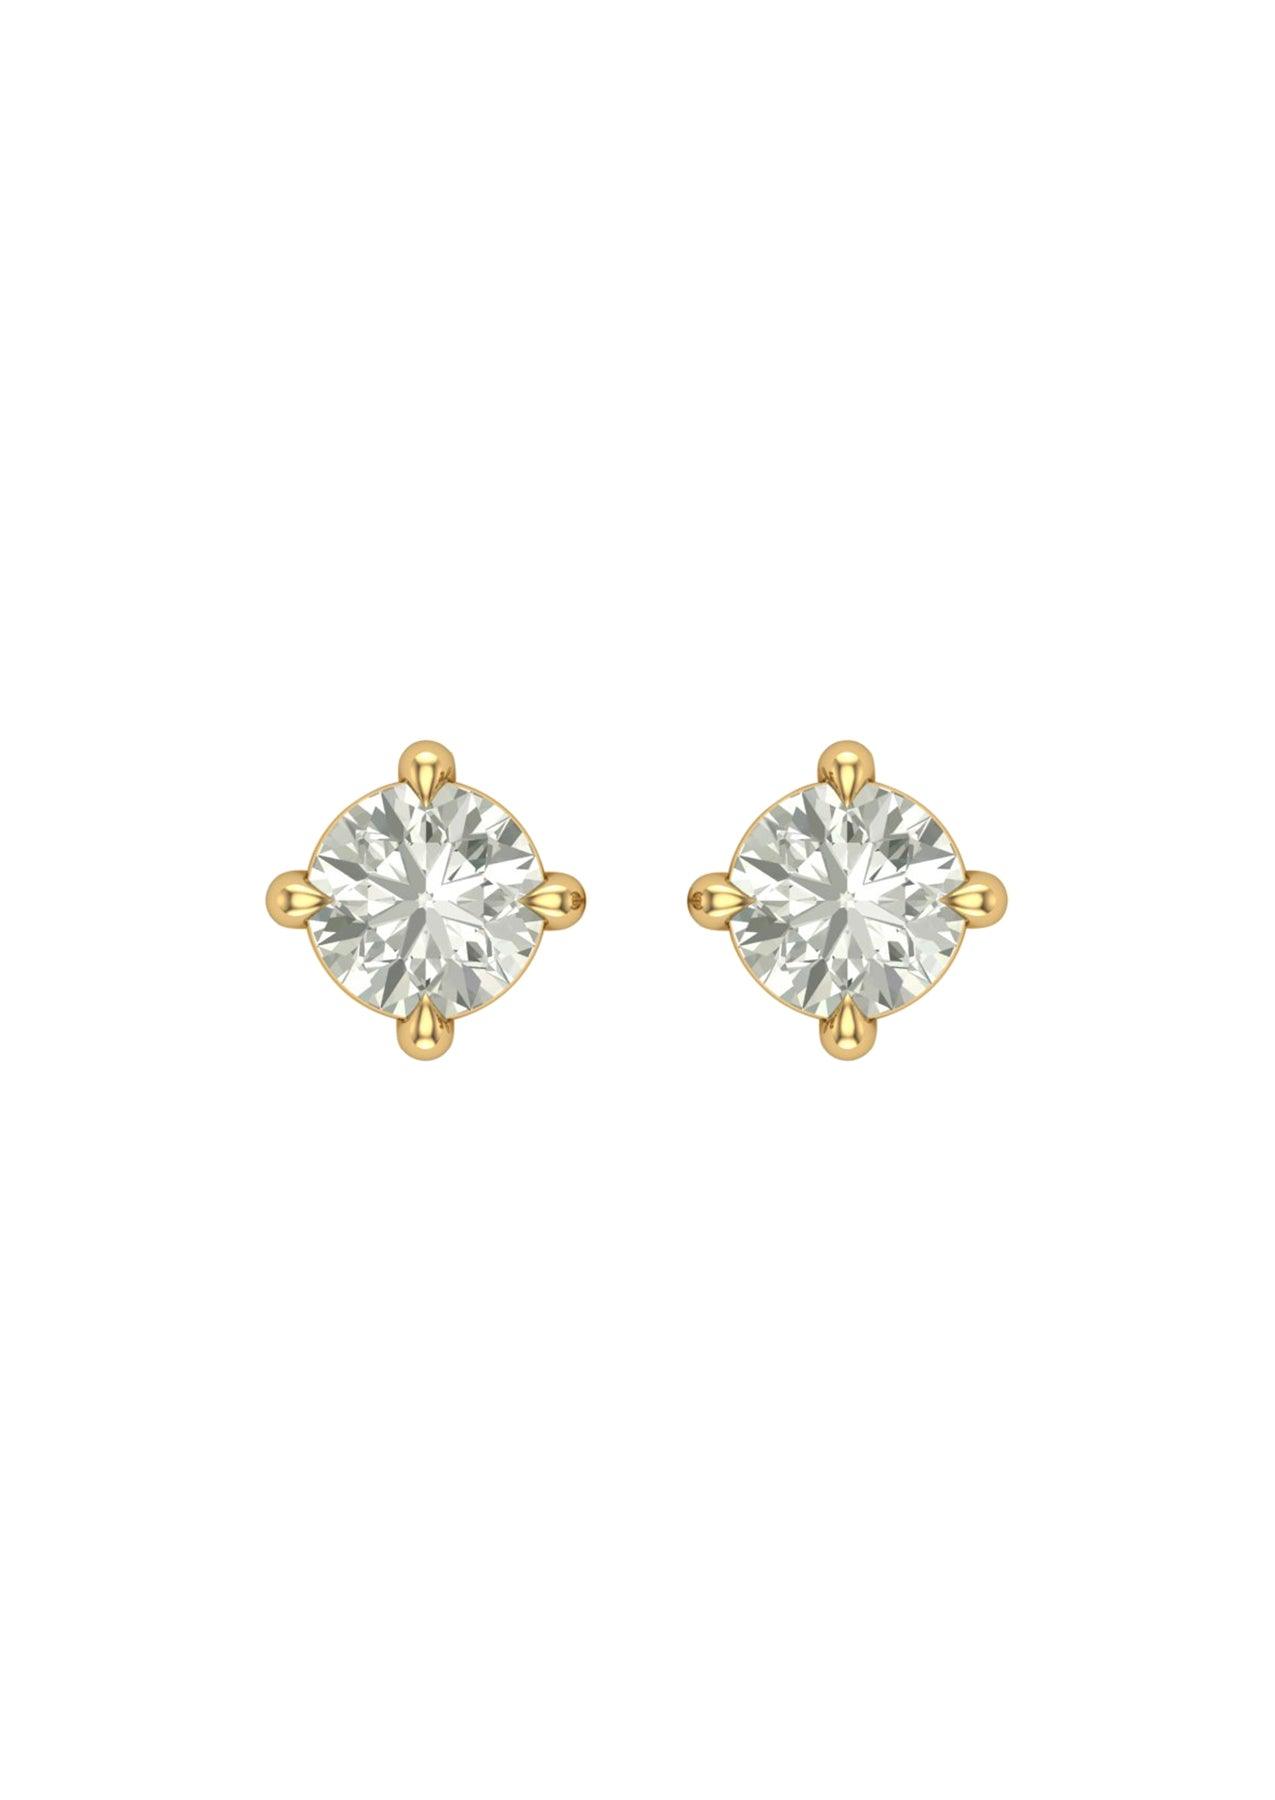 The Poe Yellow Gold 0.6ct Round Cultured Diamond Earrings